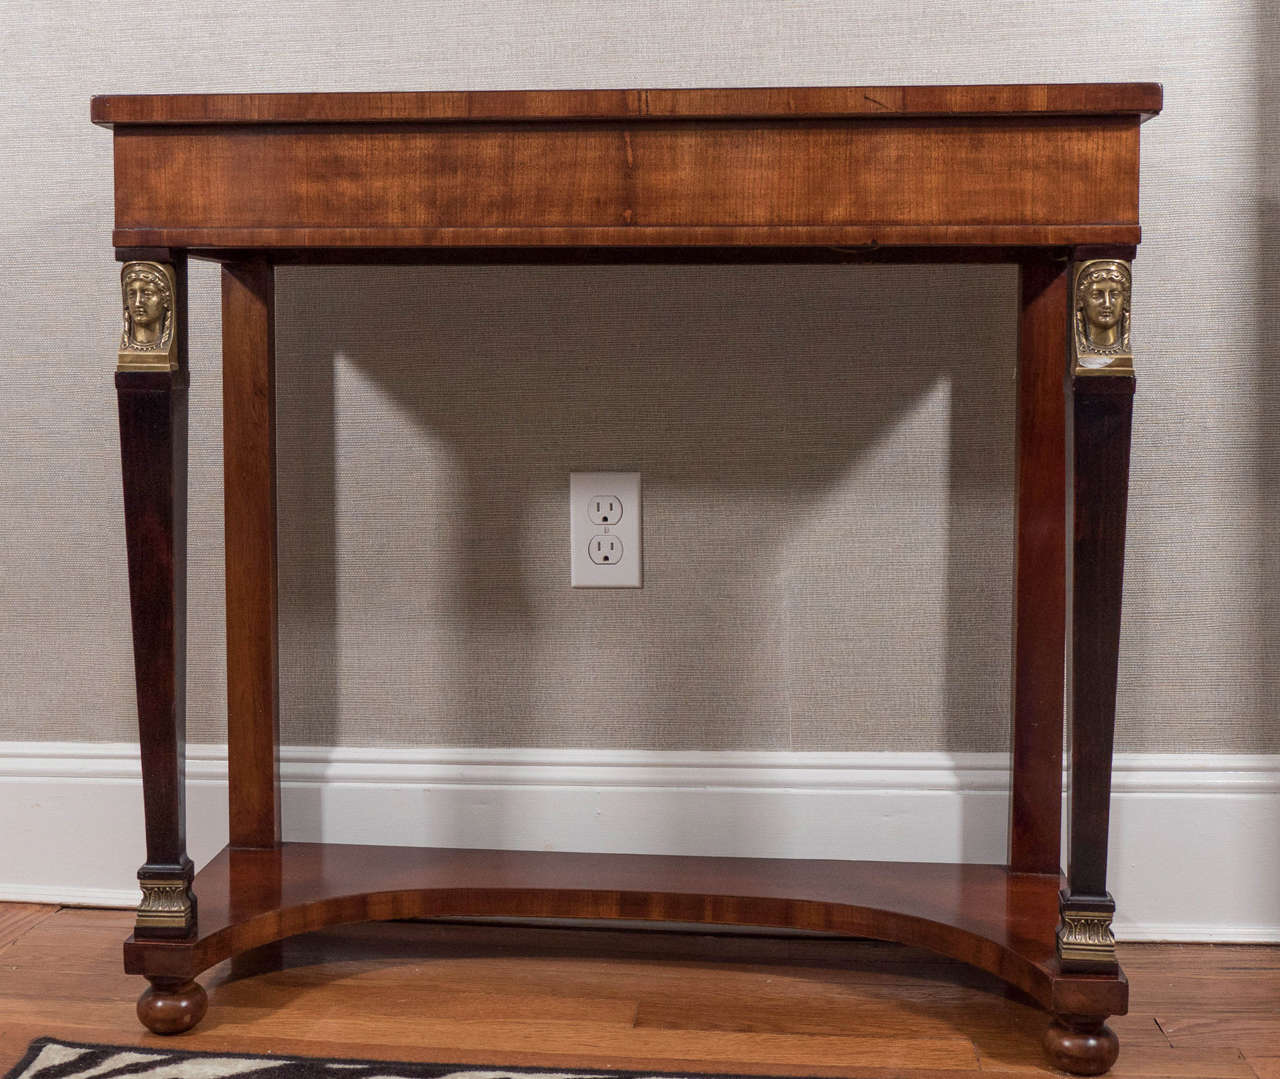 A nice looking mahogany console in a useful size, with ebonized front legs adorned with brass neoclassical figures.